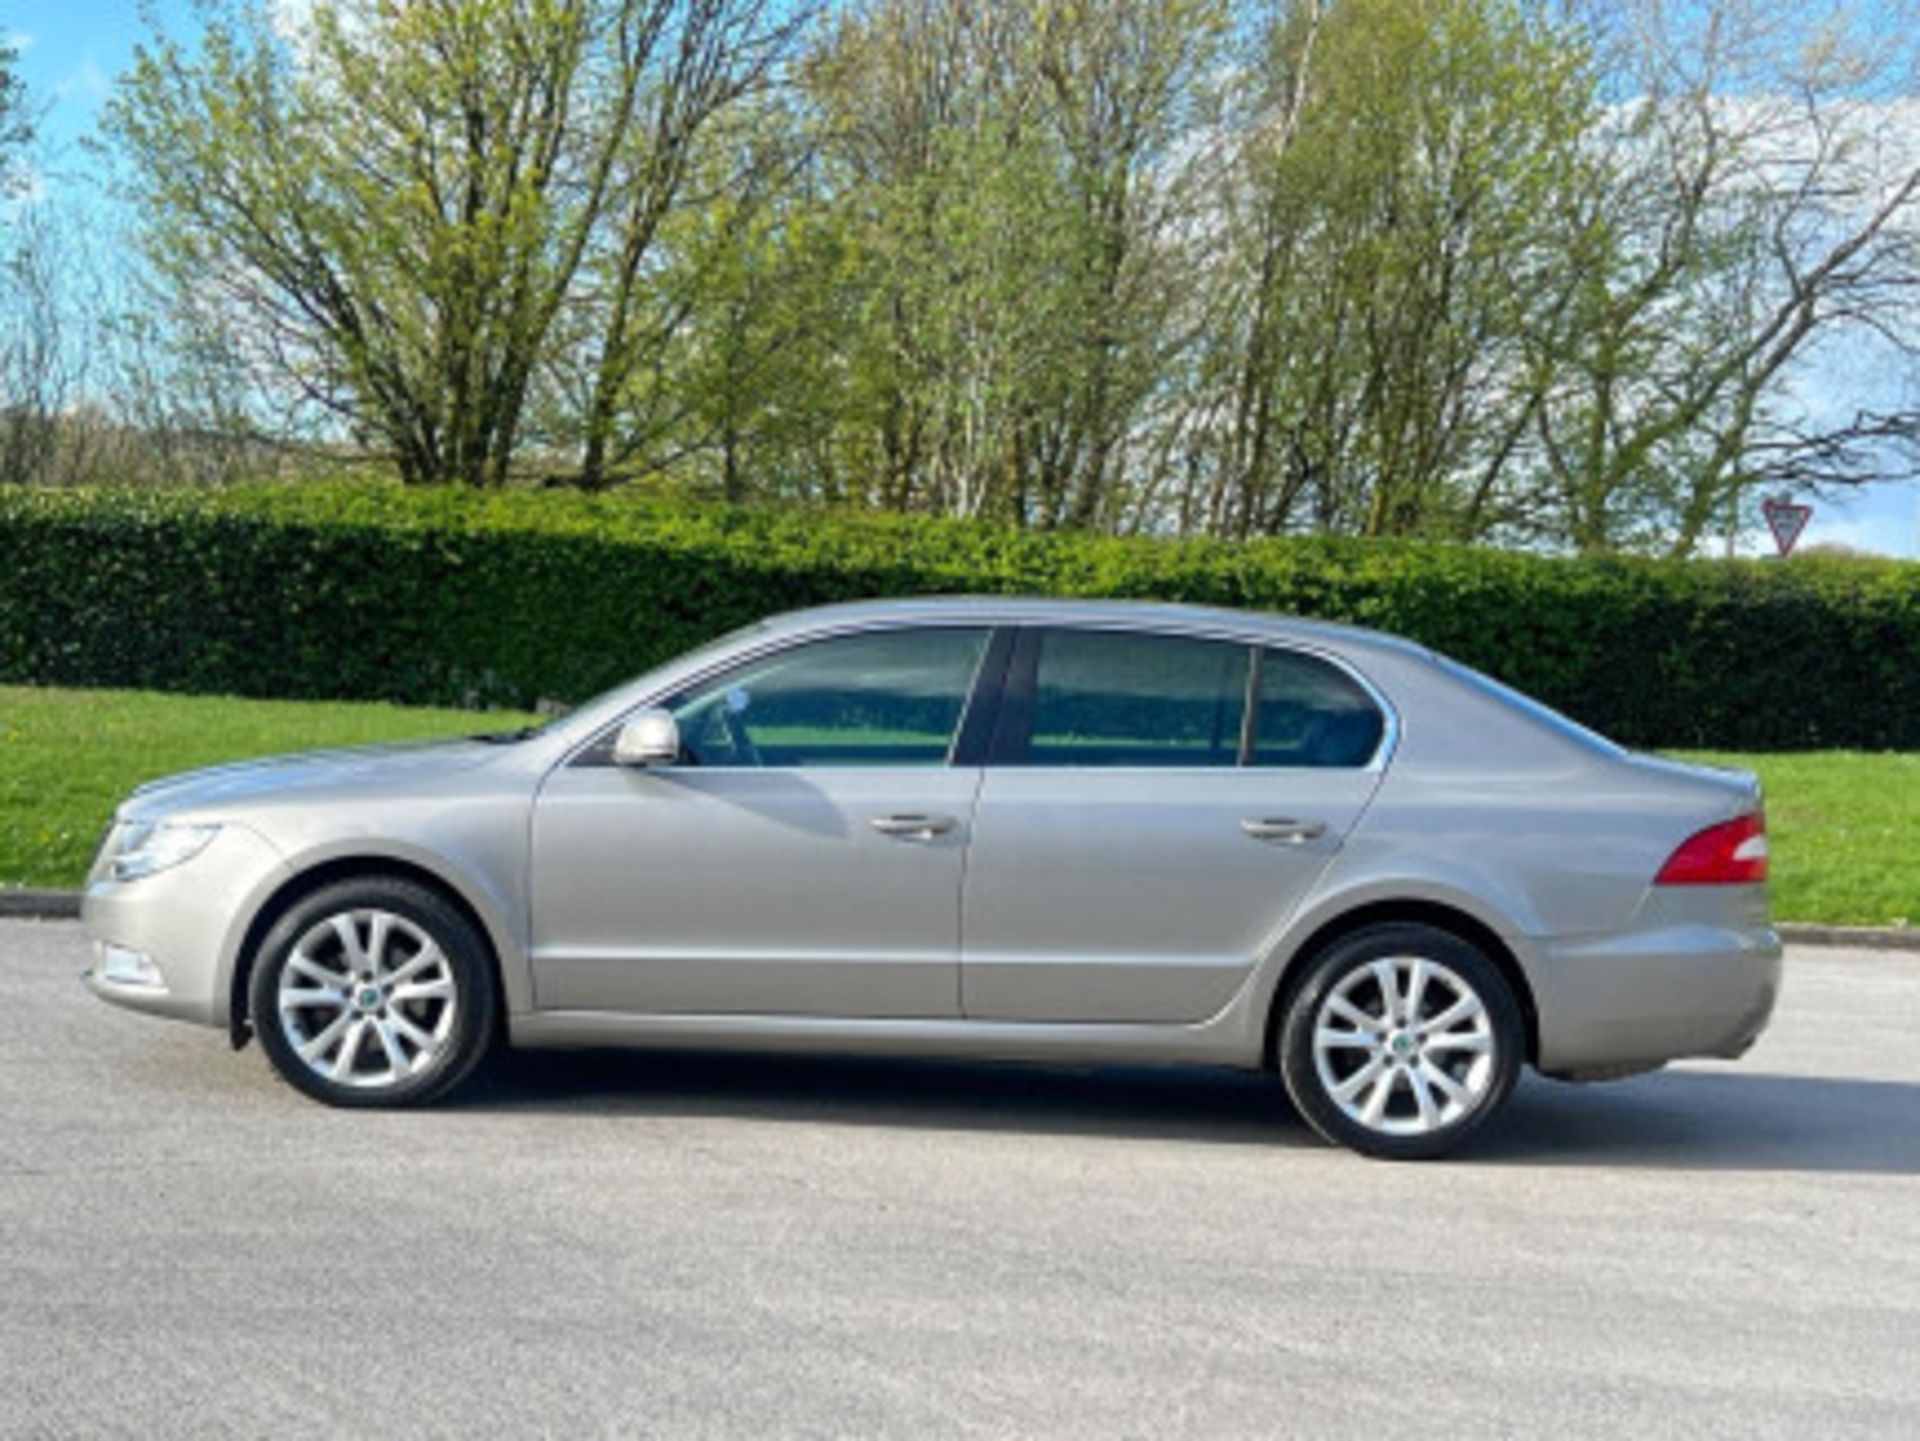 >>--NO VAT ON HAMMER--<<STYLISH AND RELIABLE SKODA SUPERB 1.6 TDI S GREENLINE II EURO 5 - Image 41 of 141